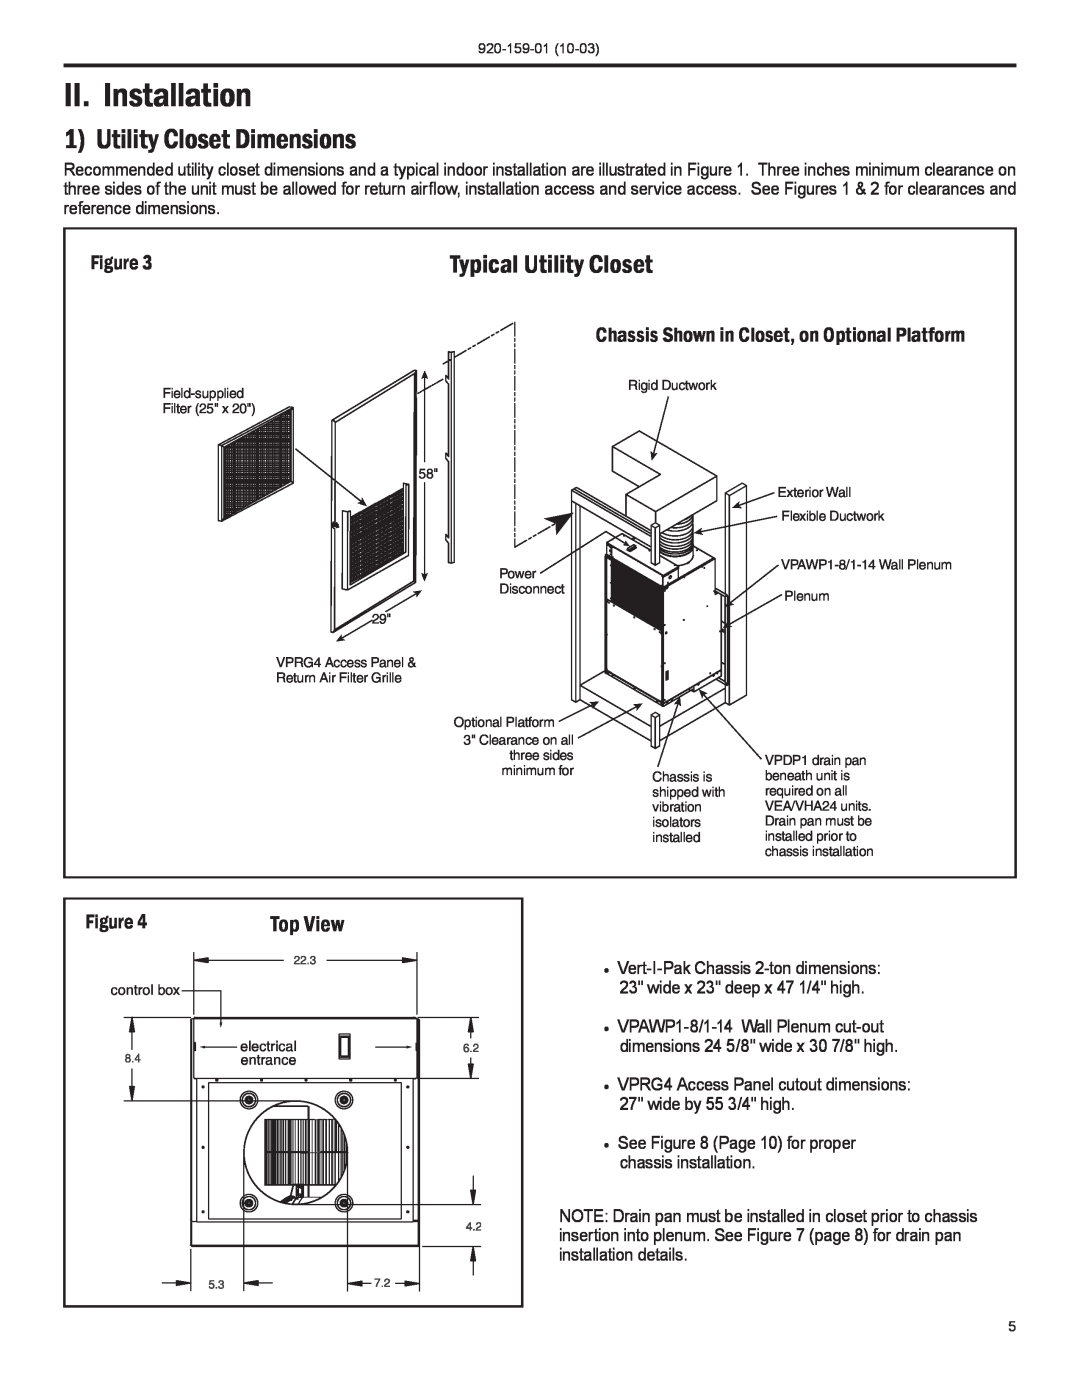 Friedrich 920-159-01 (10-03) operation manual II. Installation, Utility Closet Dimensions, Typical Utility Closet, Top View 